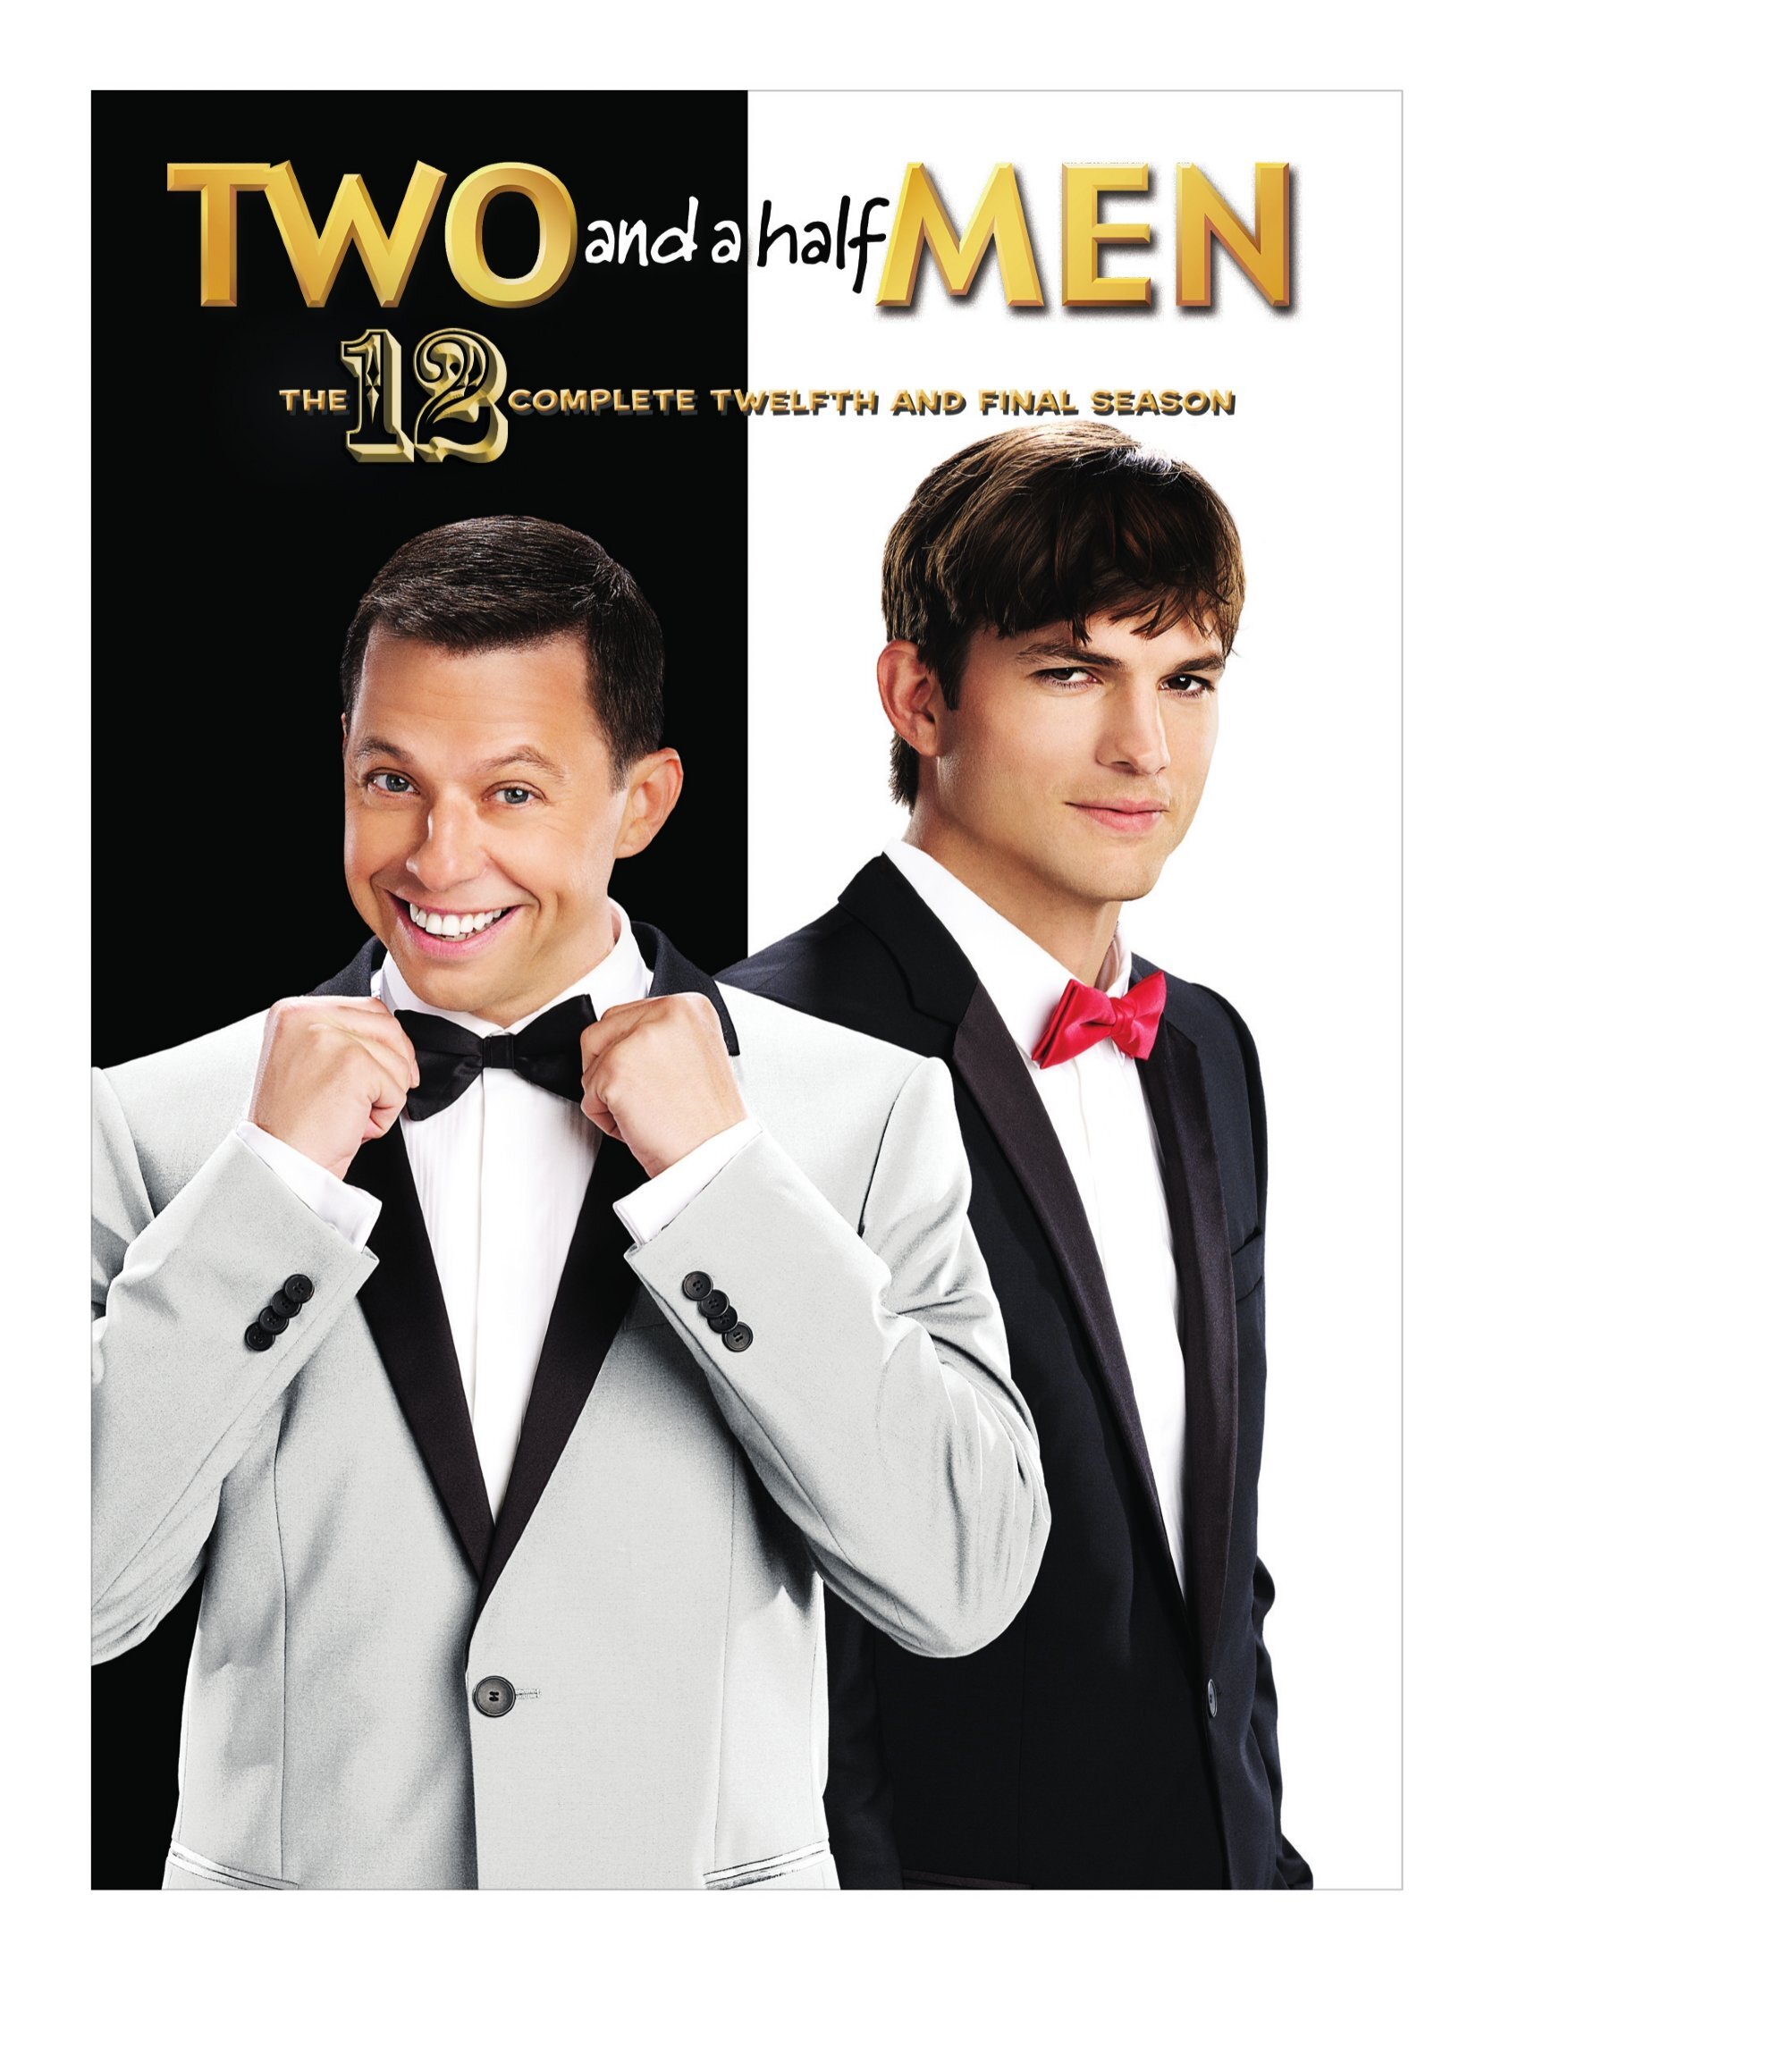 Two And A Half Men: The Complete Twelfth And Final Season - DVD [ 2015 ]  - Comedy Television On DVD - TV Shows On GRUV